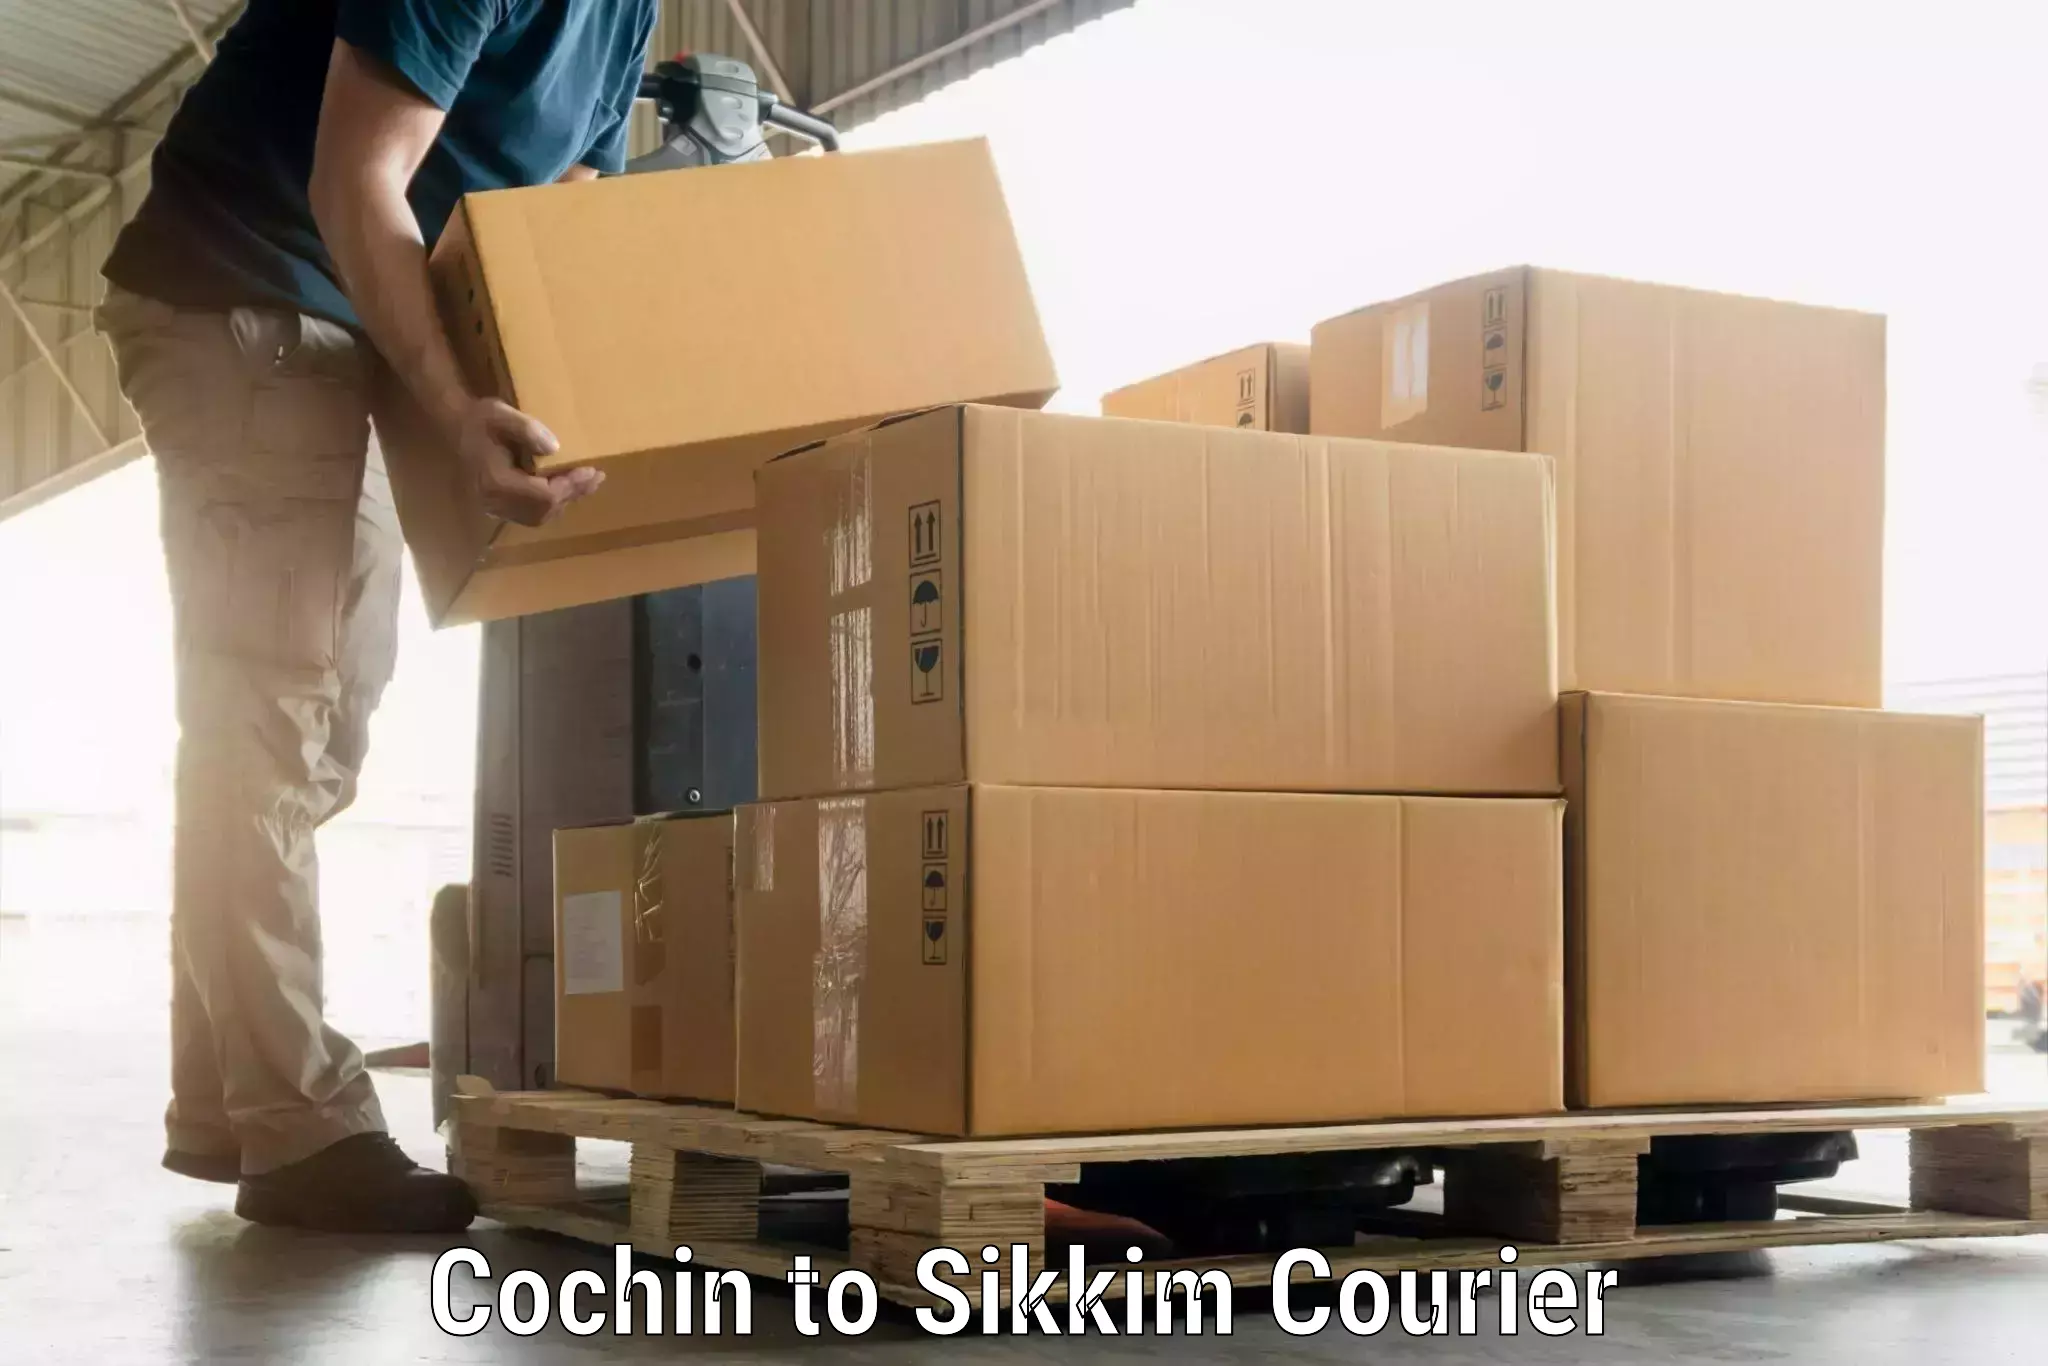 Luggage delivery network Cochin to Pelling